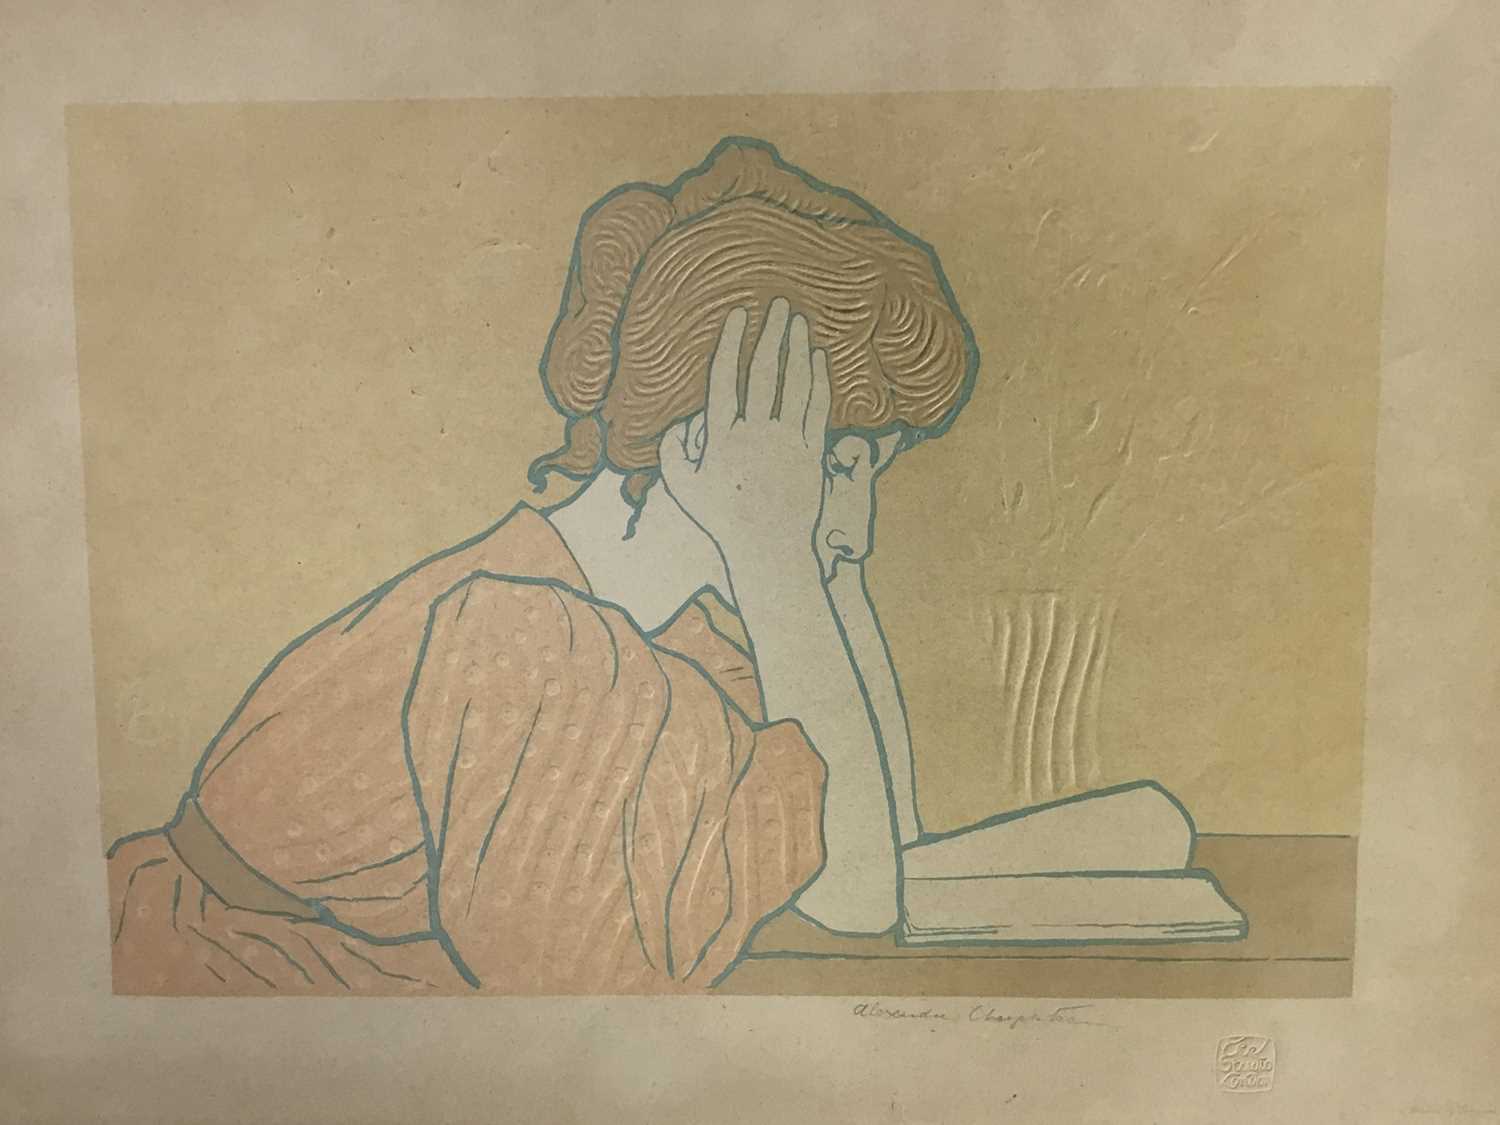 Lot 228 - Alexander-Louis-Marie Charpentier, 1856-1909. Art Nouveau studio embossed lithograph, 1896, “Young Woman Reading”. Signed in graphite and embossed studio mark “The Studio London” lower right